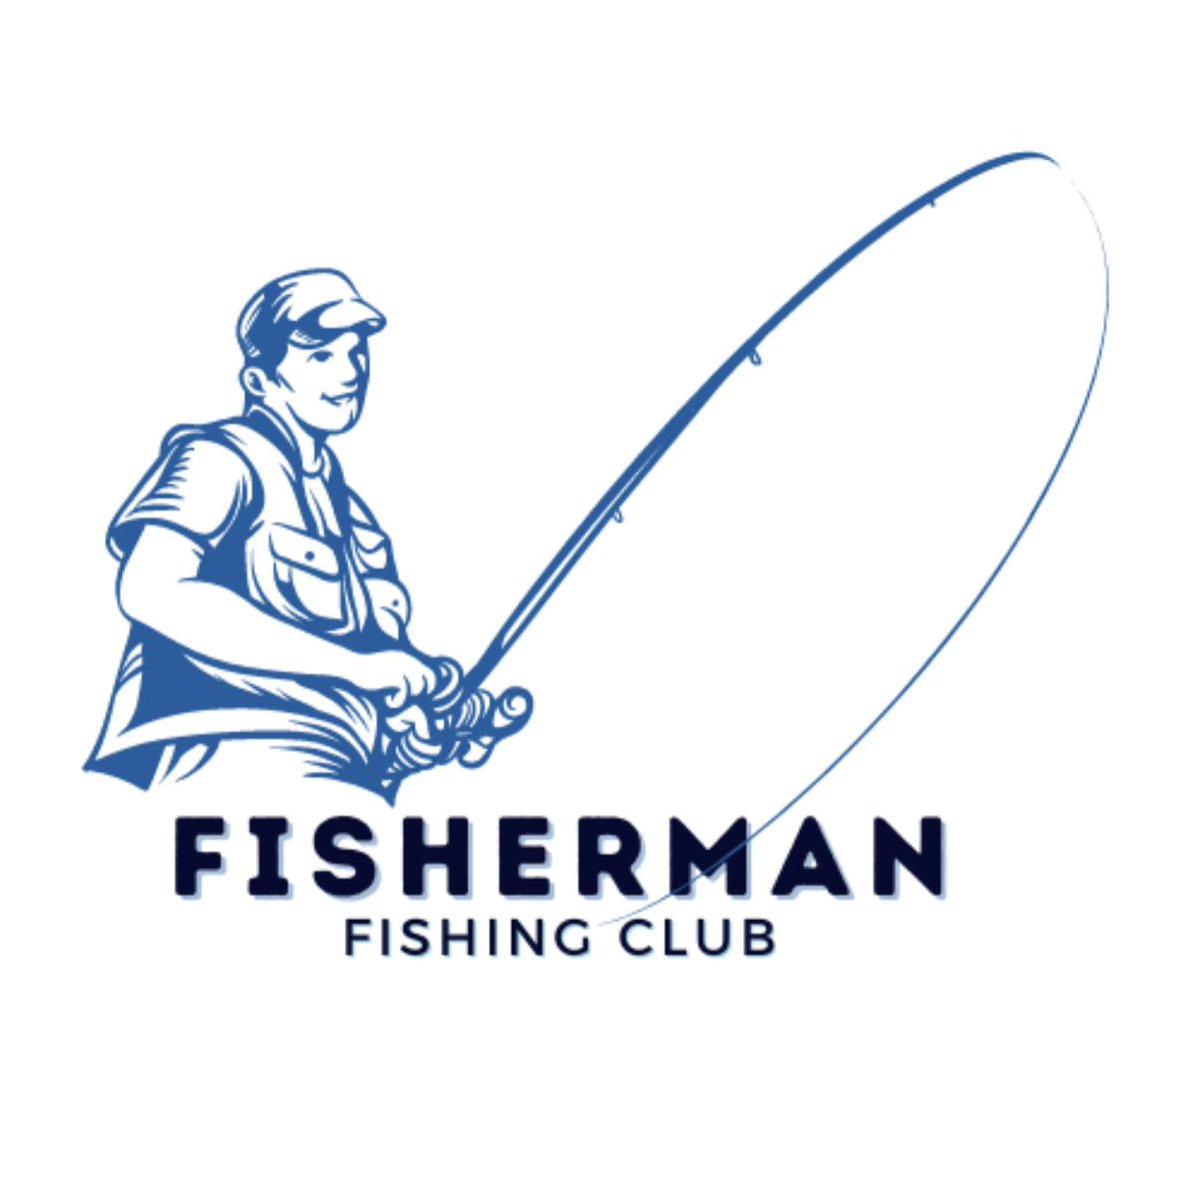 Logo designed for a fisherman club ✅
Reach me out if you need a custom eye catching logo for your business. Dm me for enquiries ❤️
#freelancing #Logodesigner #commissionsopen #repost